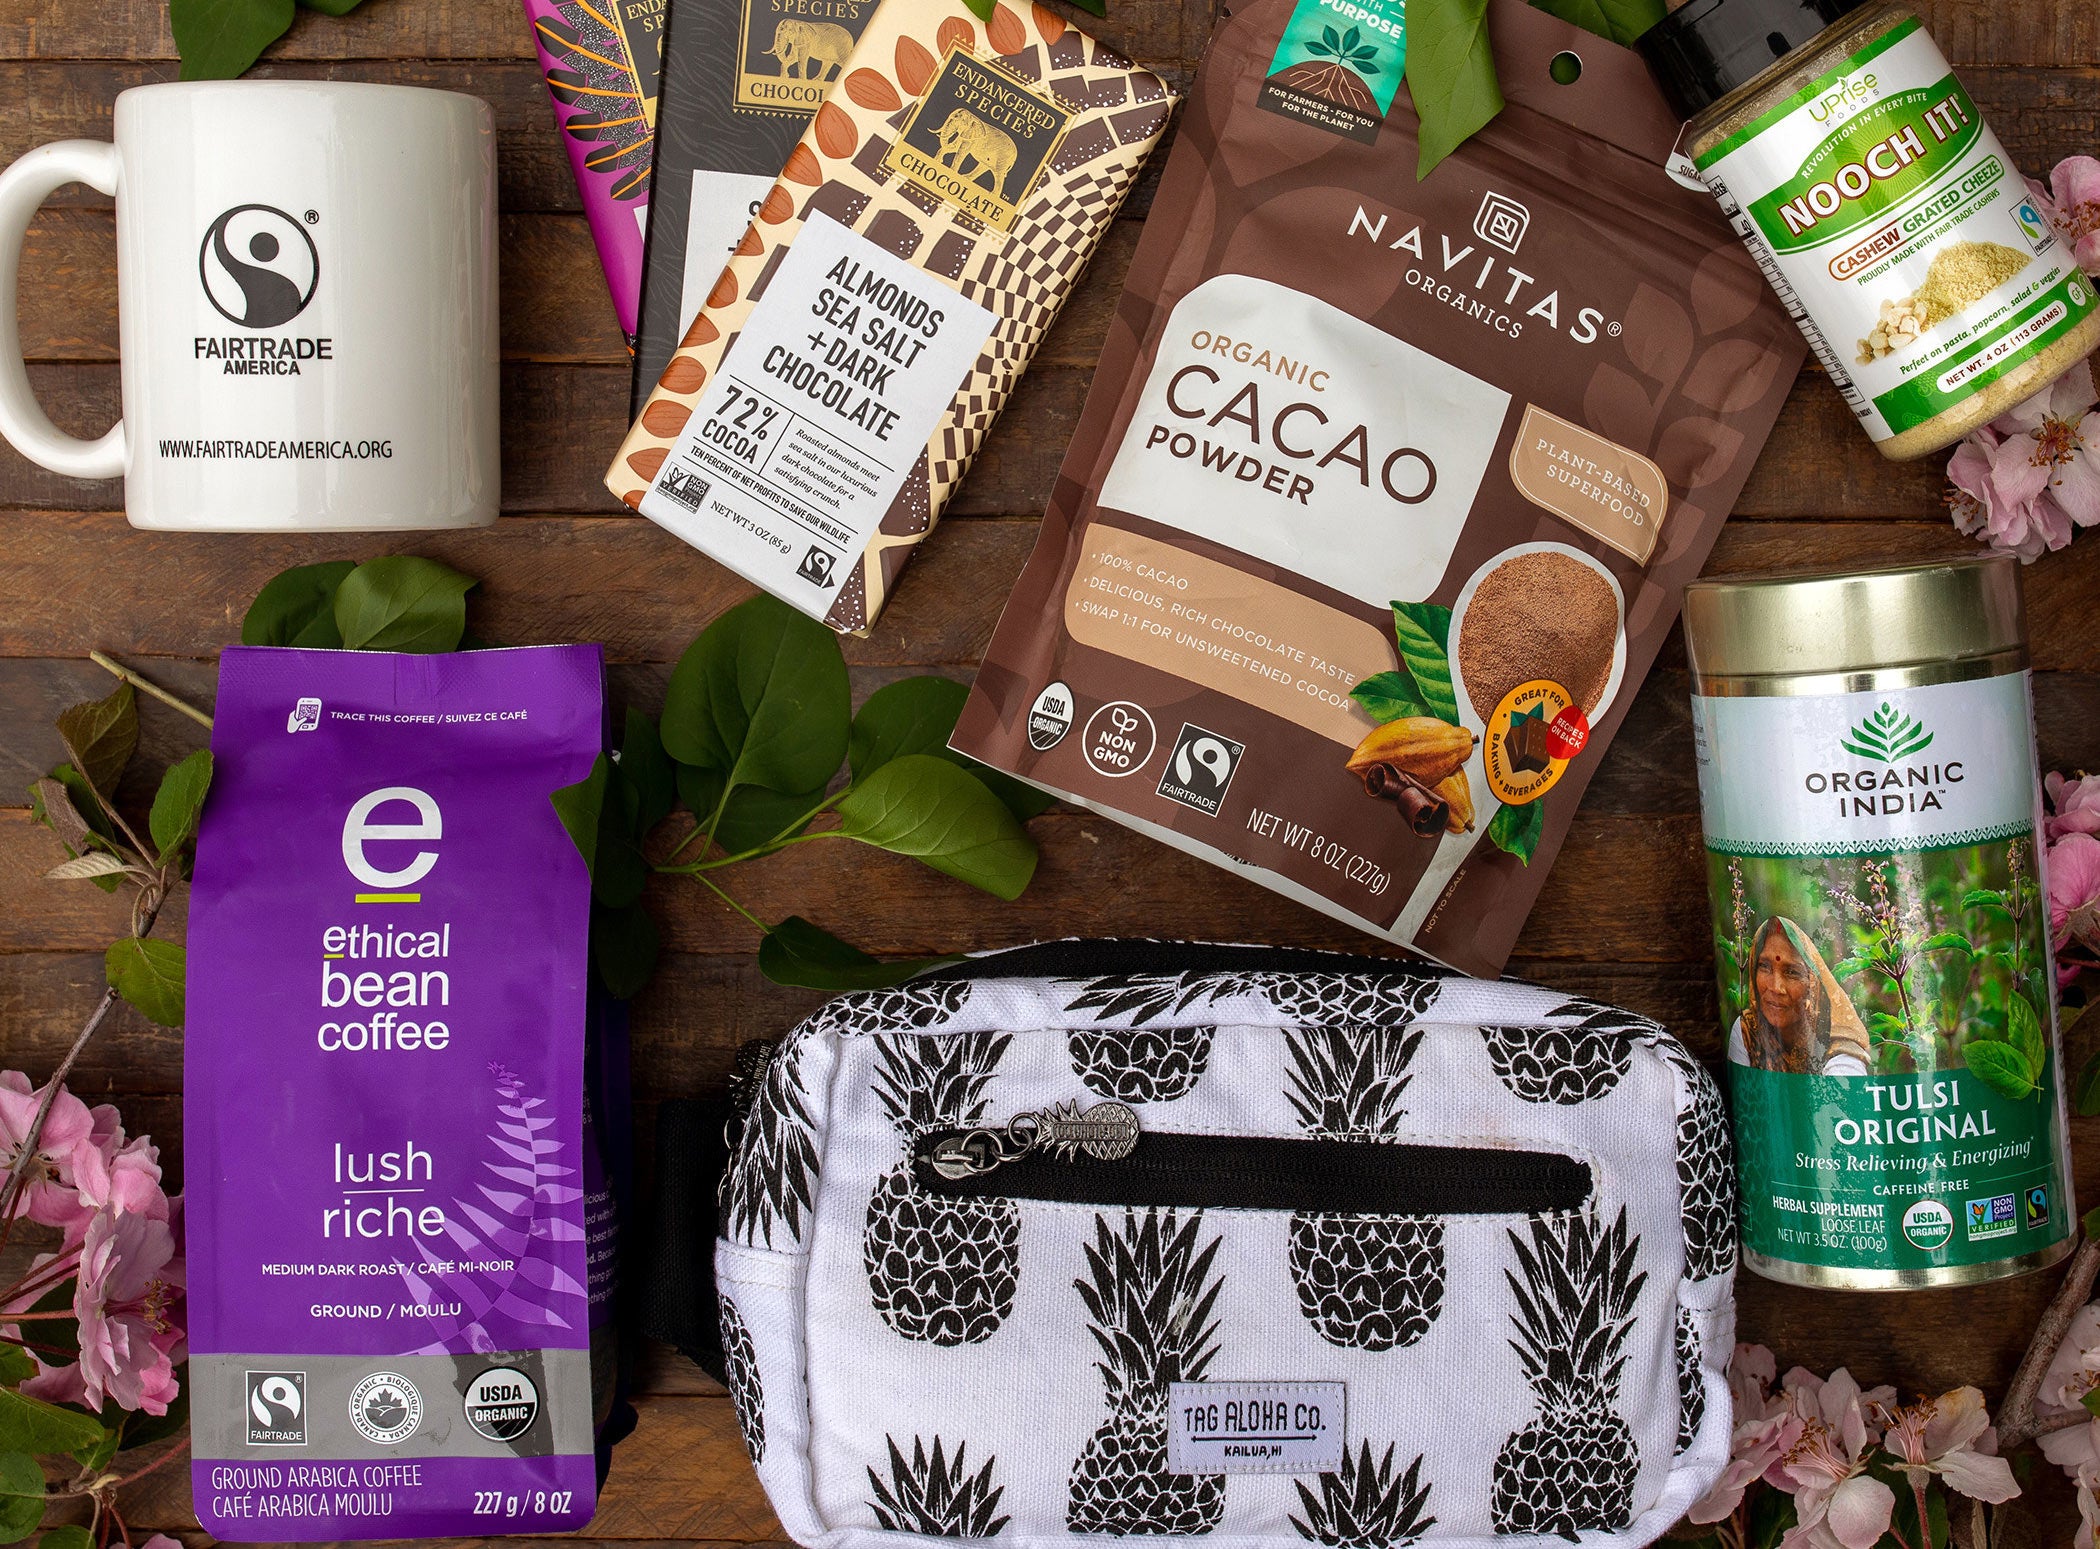 Fairtrade America Partners With Six Certified Brands to Encourage Shoppers to Make Purchases With People and the Planet in Mind